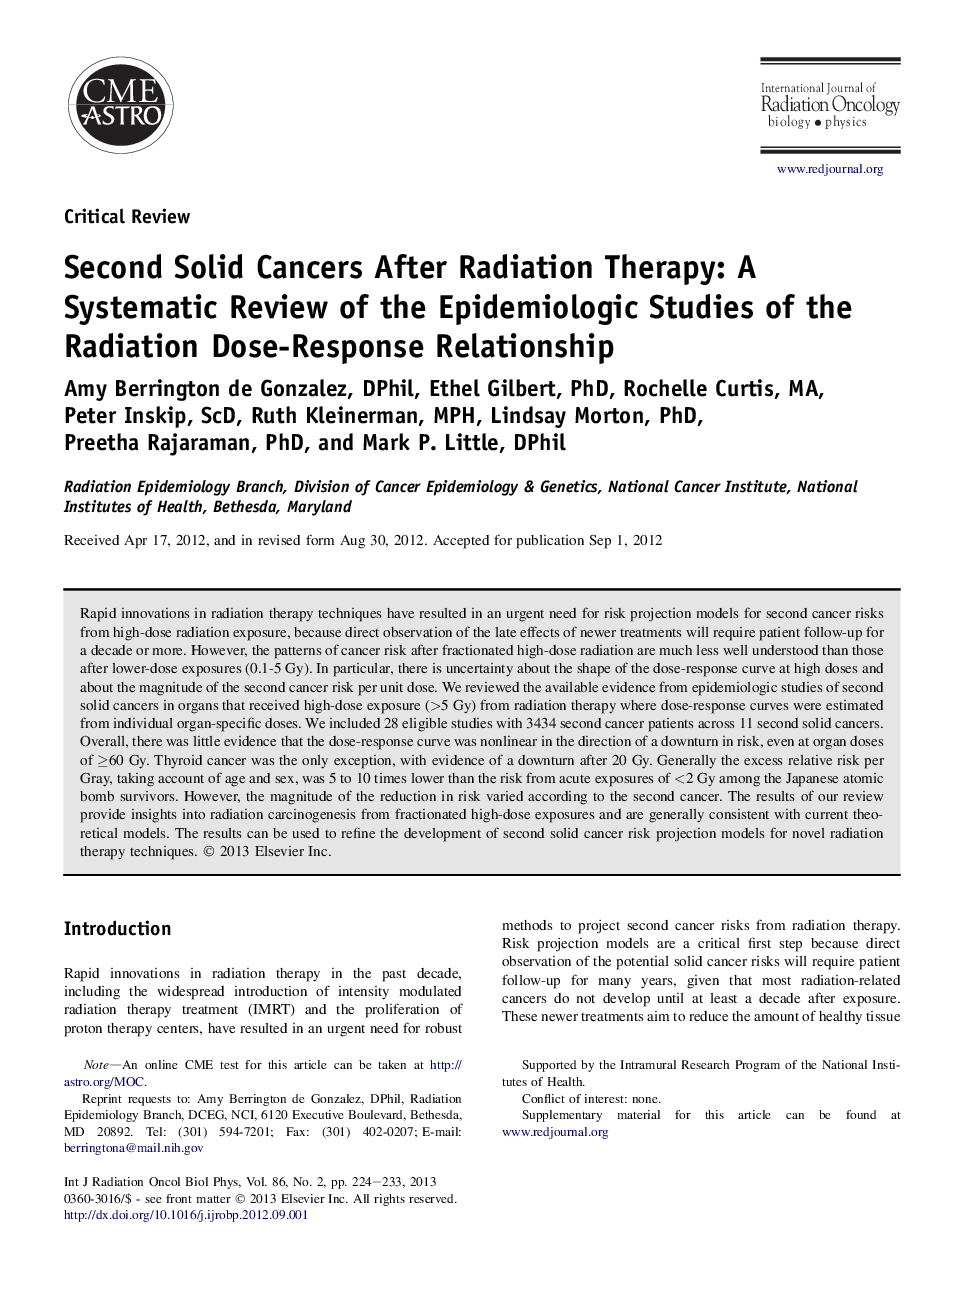 Second Solid Cancers After Radiation Therapy: A Systematic Review of the Epidemiologic Studies of the Radiation Dose-Response Relationship